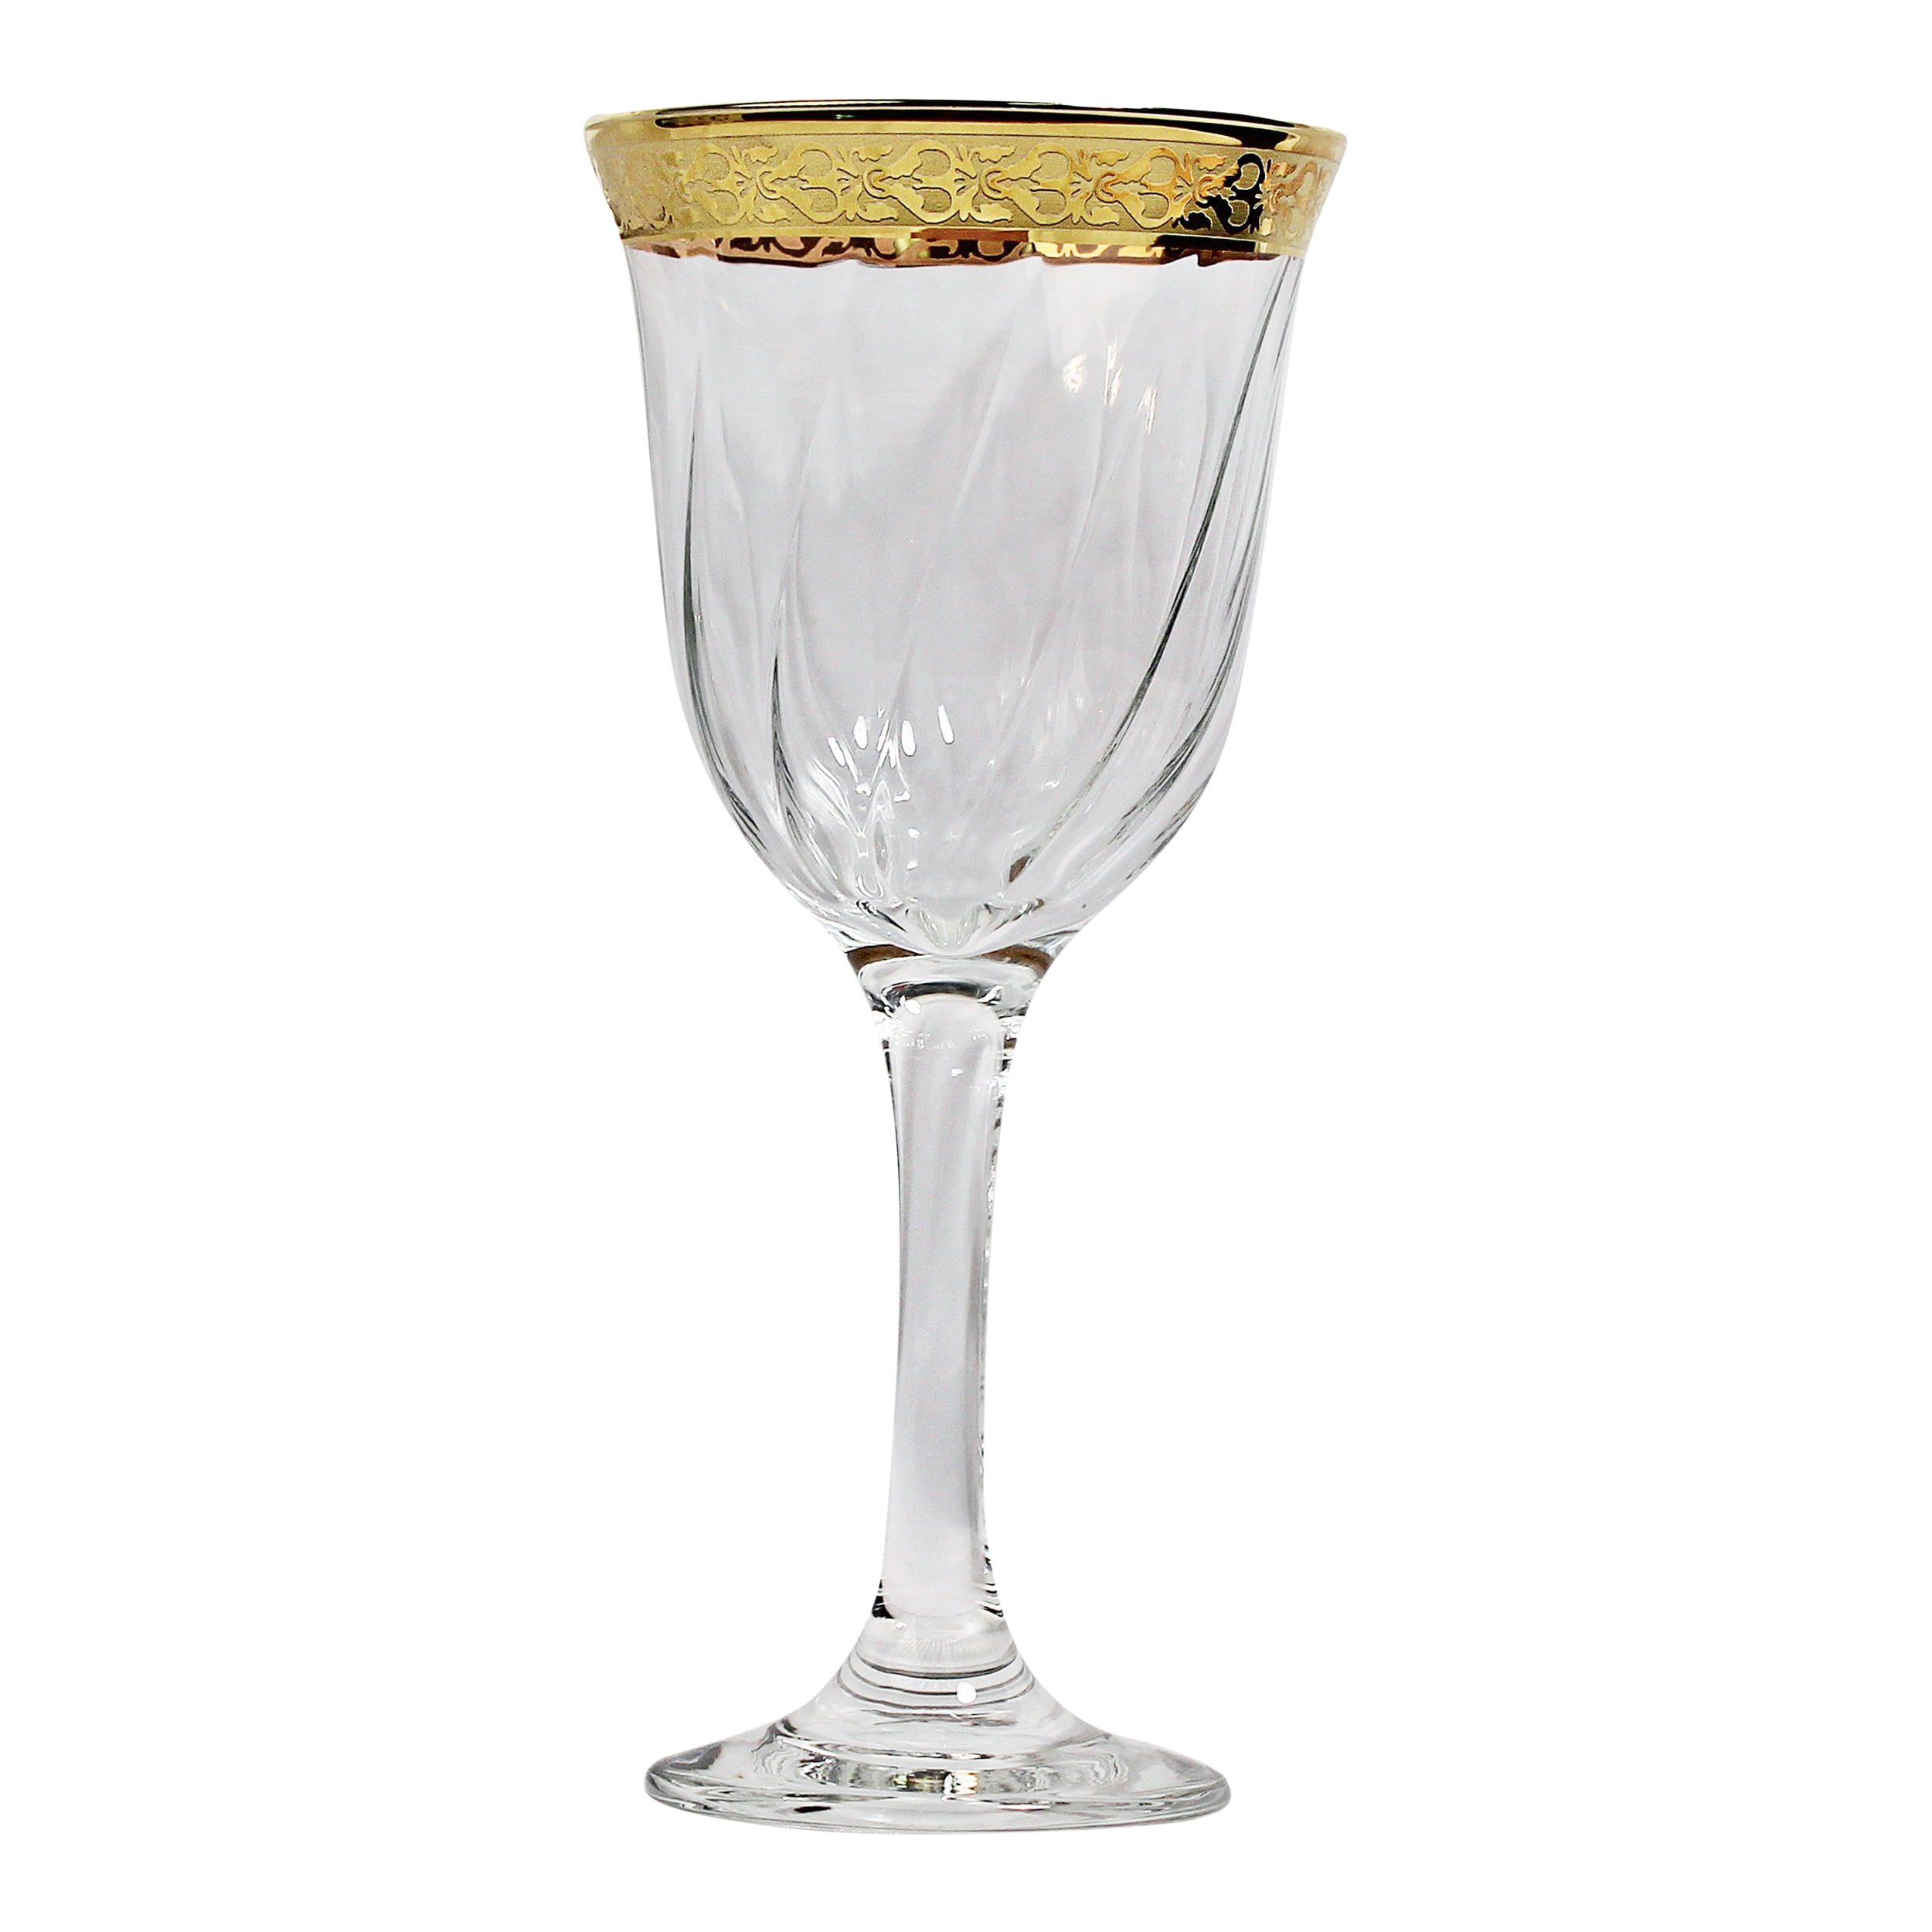 Cadamada Wine Glasses,8oz White Wine Goblets,for Red or White Wine,  High-end Banquets, Parties, Bars, Weddings, Gifts (16 pcs)